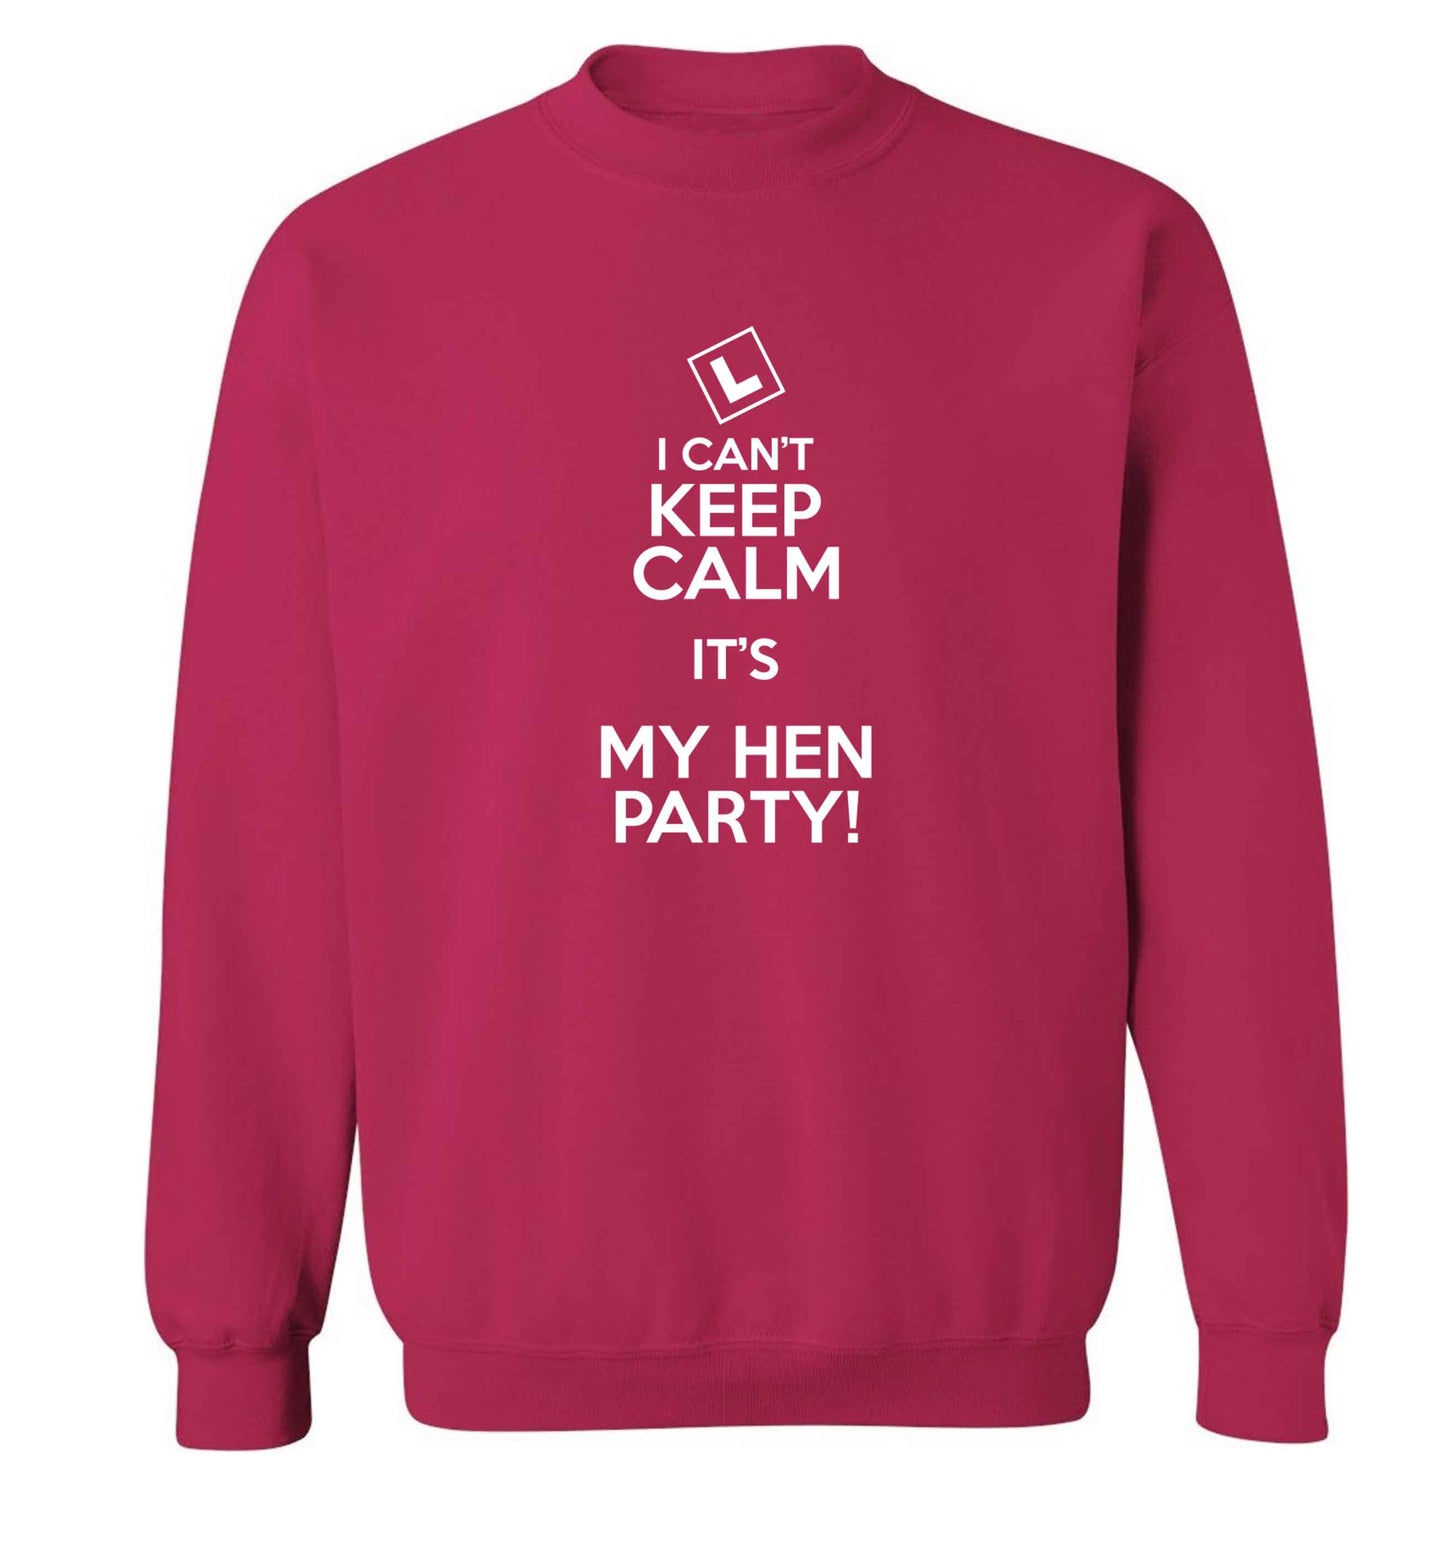 I can't keep calm it's my hen party adult's unisex pink sweater 2XL